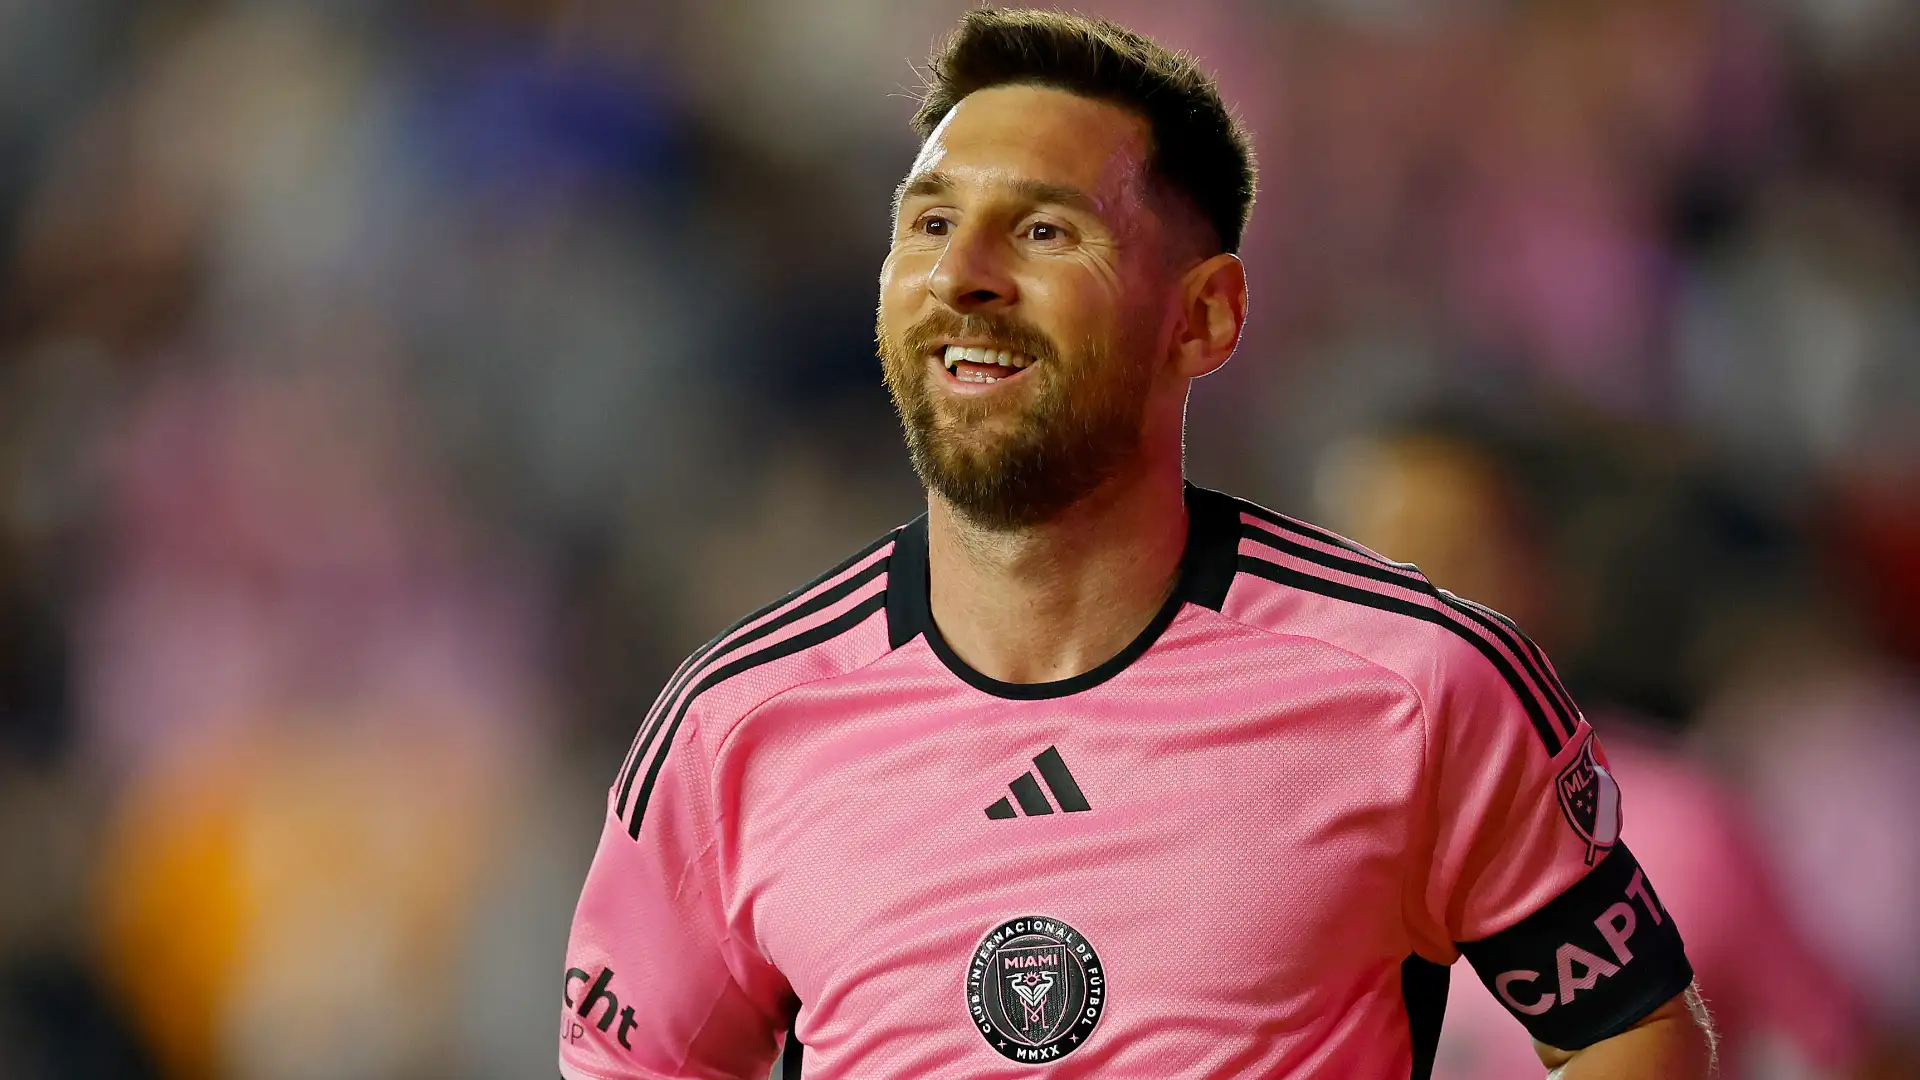 ‘Smiles every day’ – Lionel Messi treading same MLS path as Johan Cruyff as Inter Miami superstar finds privacy denied him at Barcelona & Paris Saint-Germain